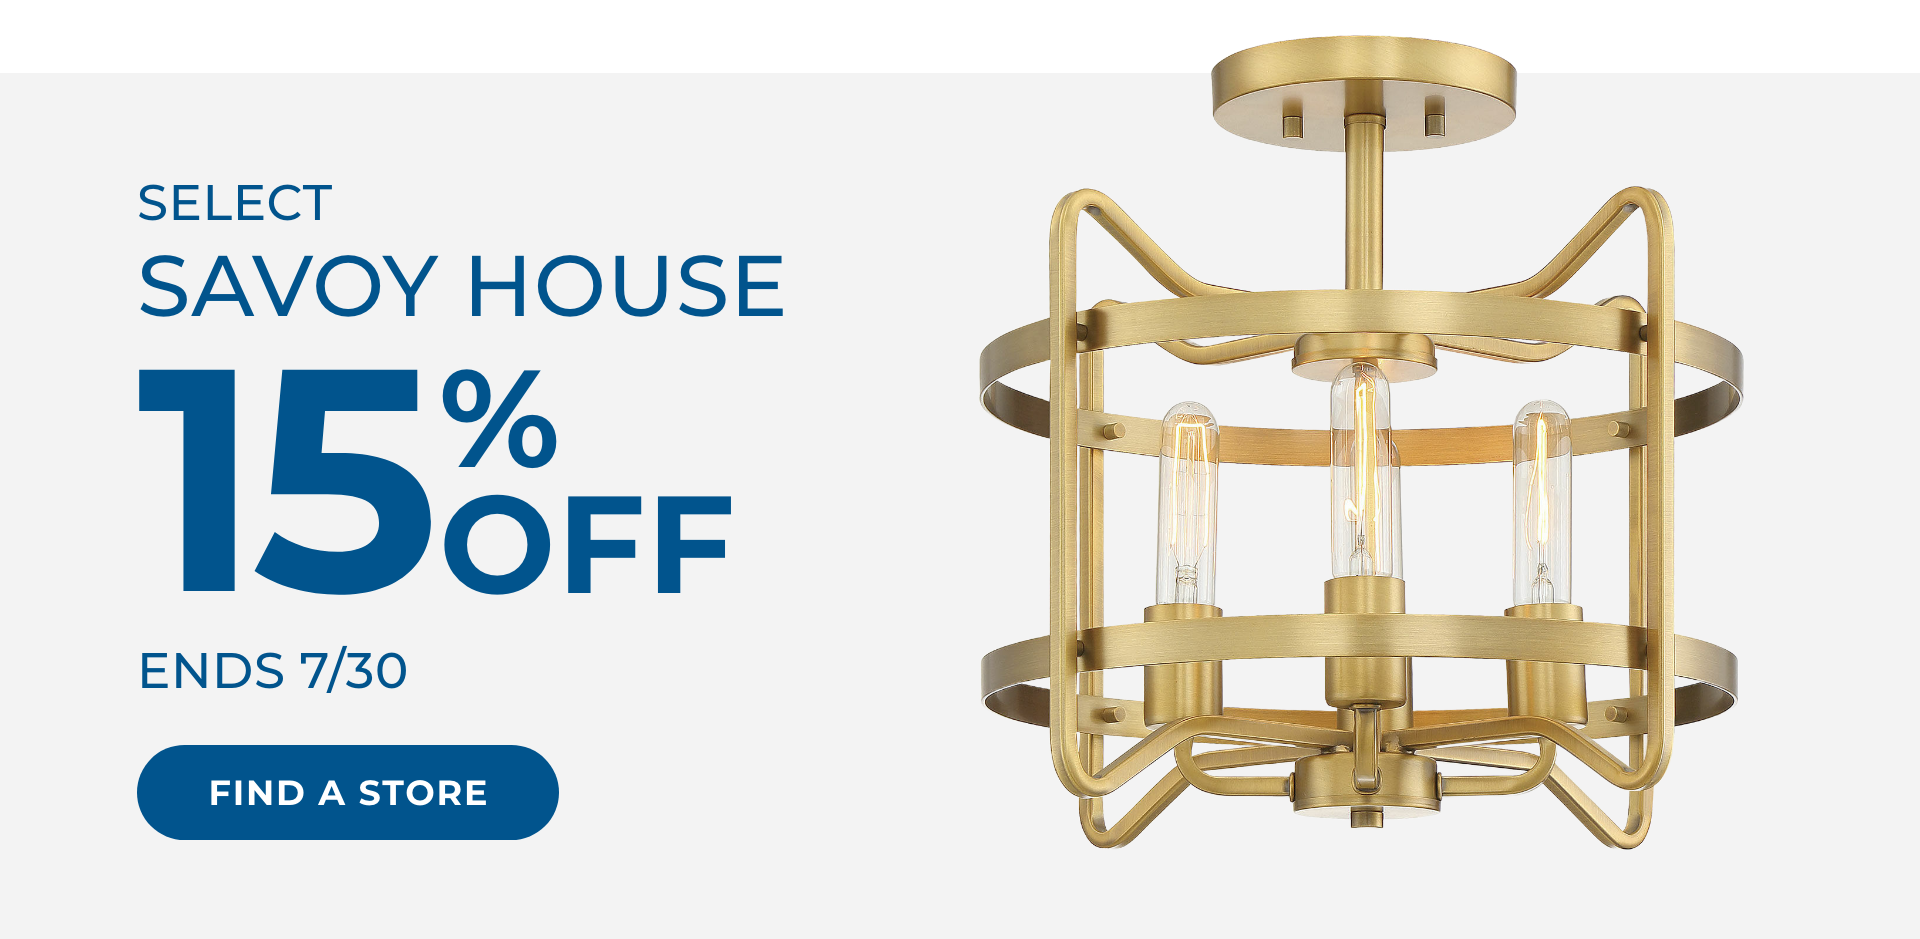 Save 15% on select Savoy House. Ends 7/30.